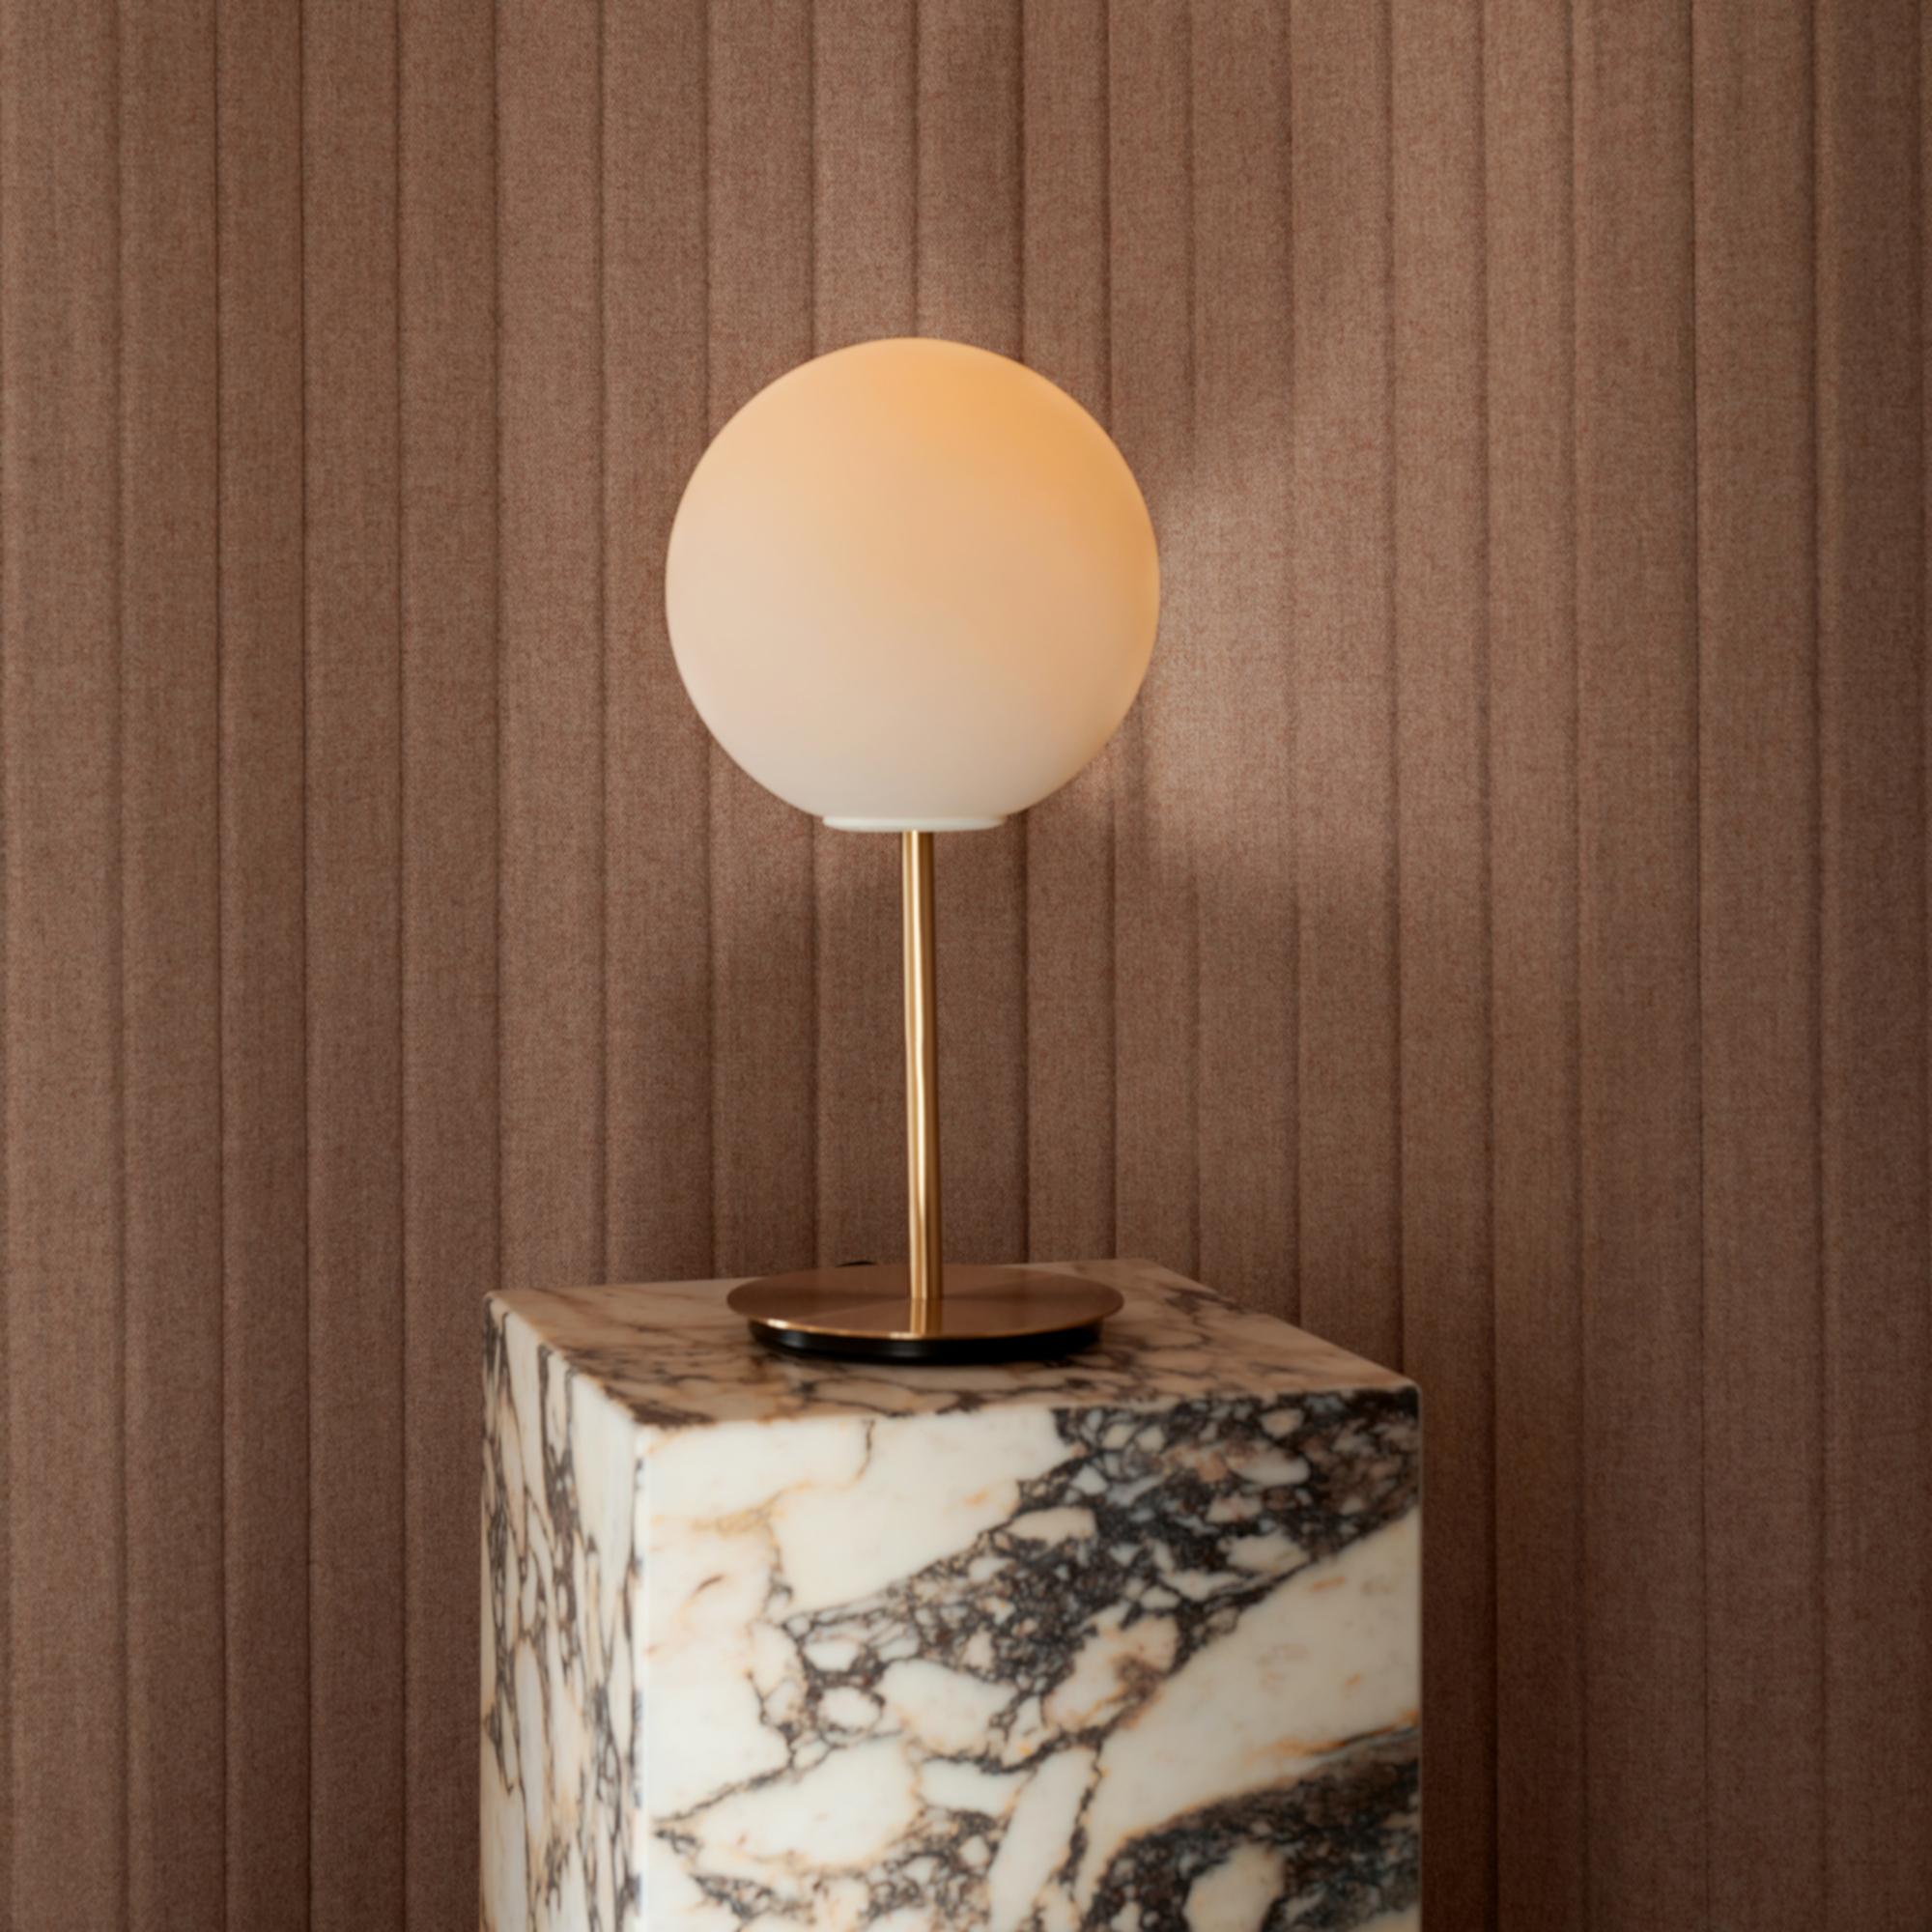 Chinese TR Bulb Table Lamp with a Brushed Brass Base and a Shiny Opal Bulb, Dim-to-Warm For Sale